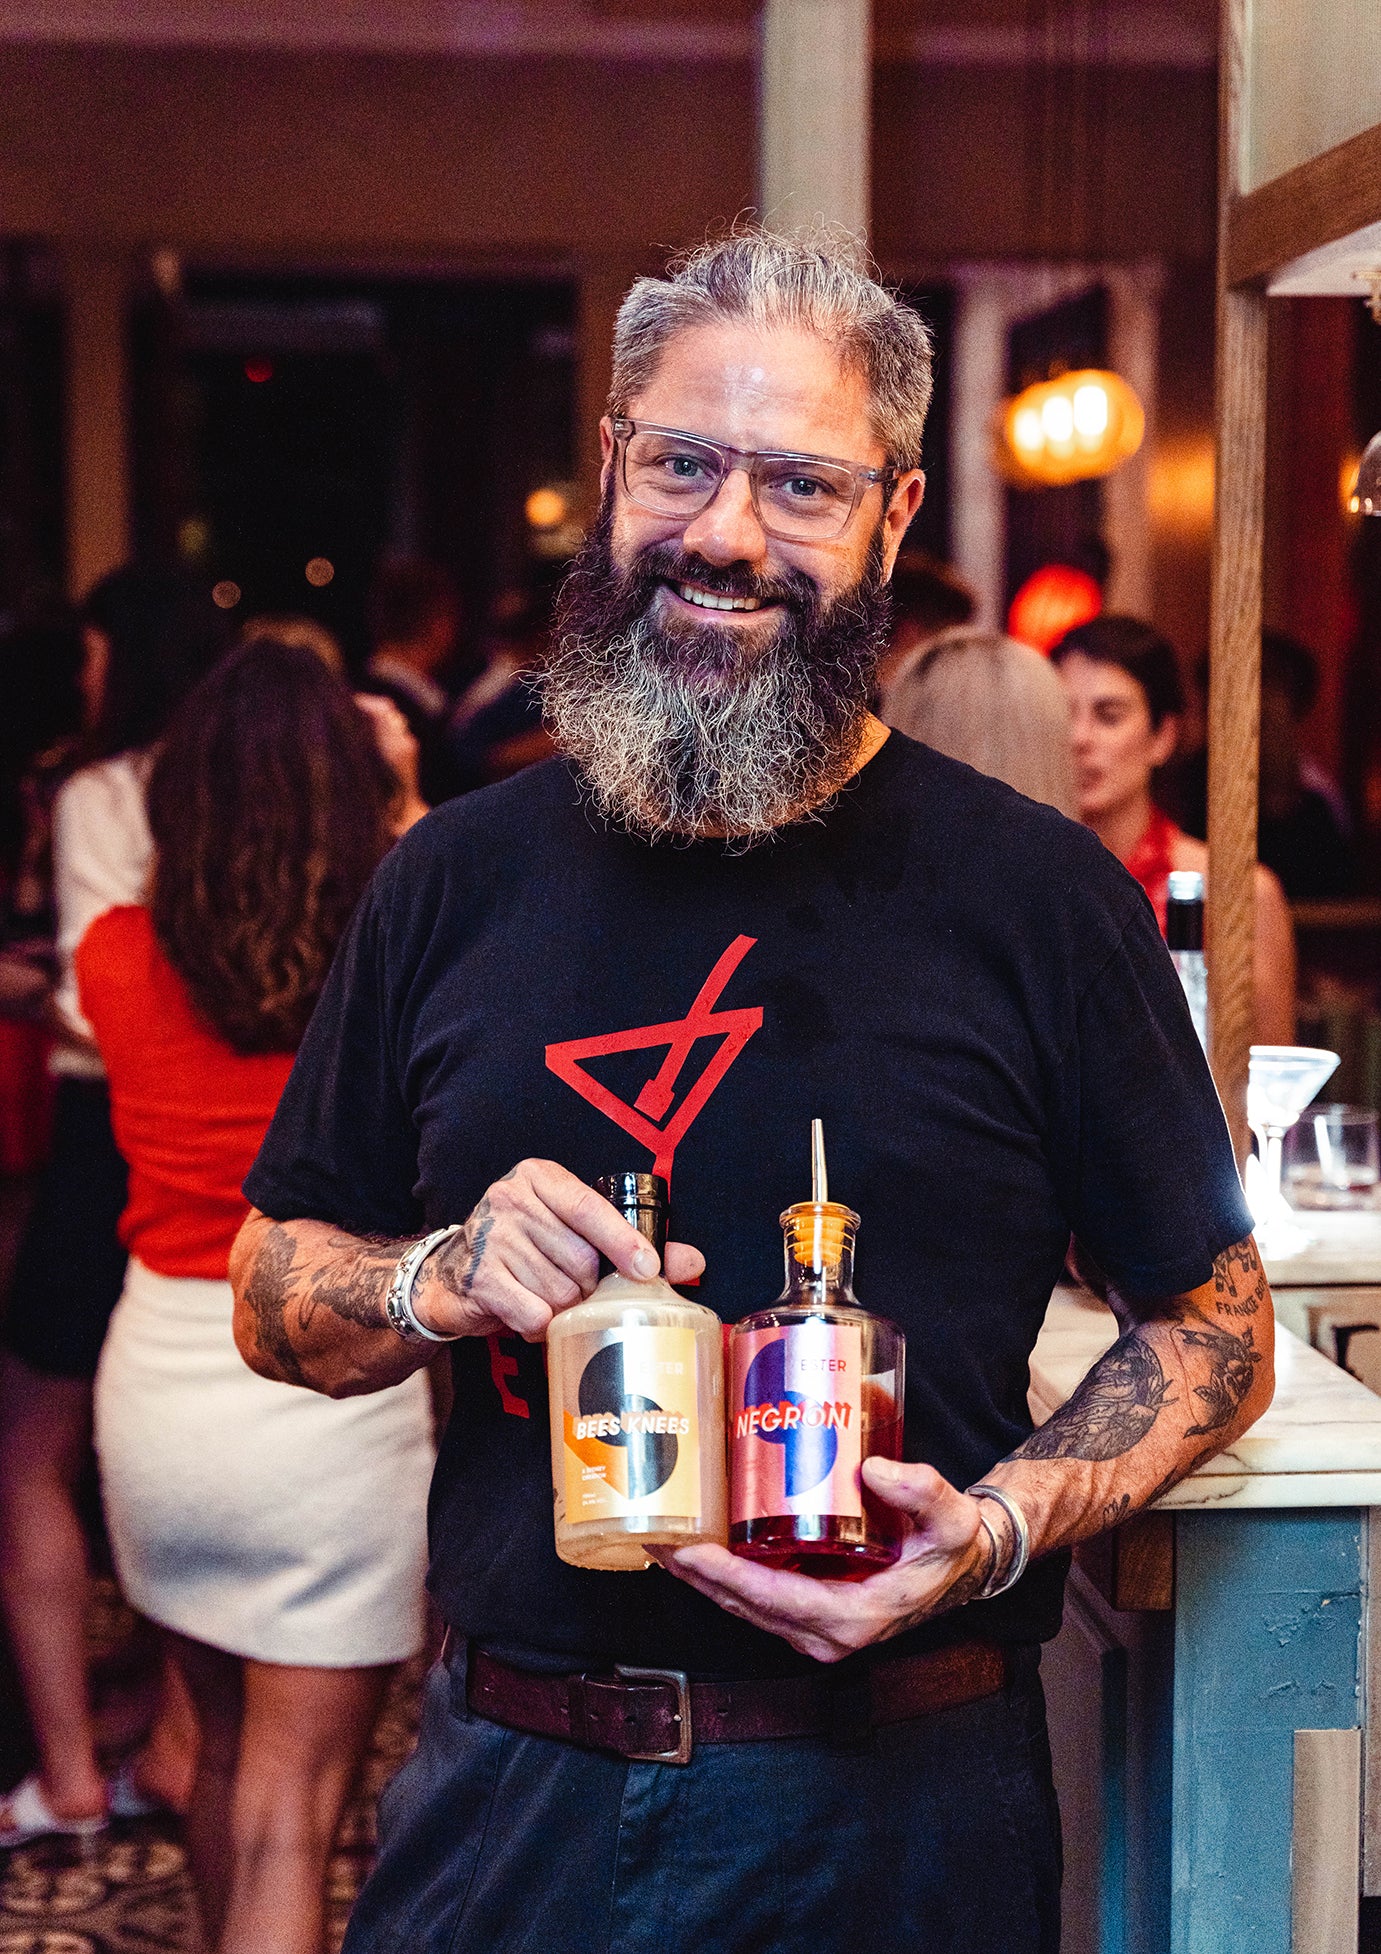 Tiger Purrr chai launch event at Red Lantern restaurant in collaboration with Ester Spirits